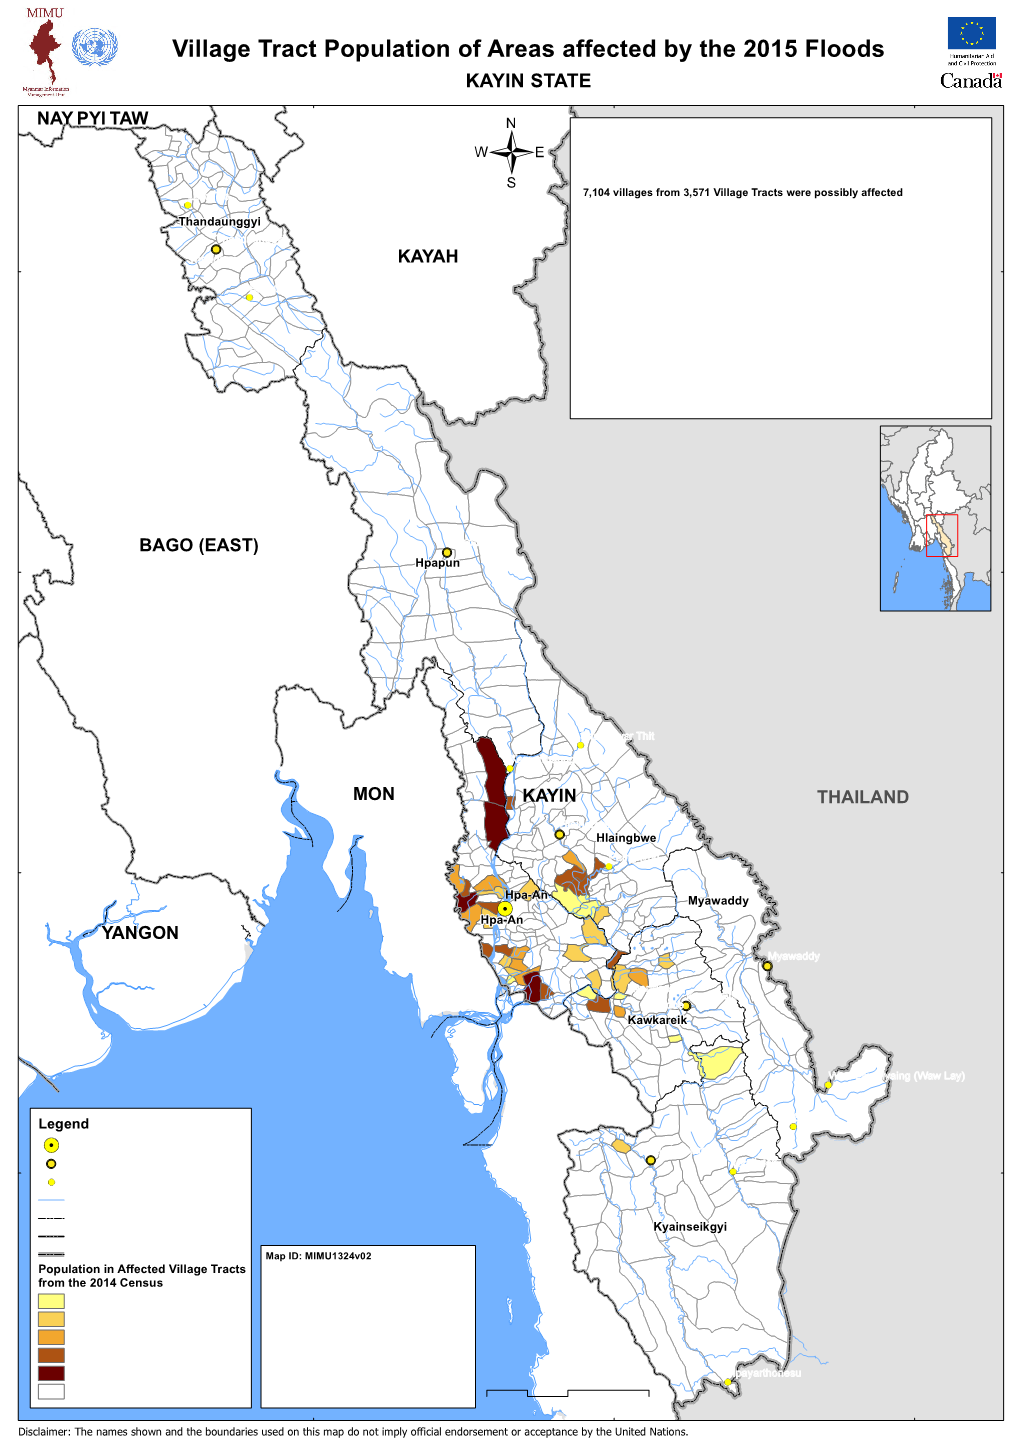 Village Tract Population of Areas Affected by the 2015 Floods KAYIN STATE